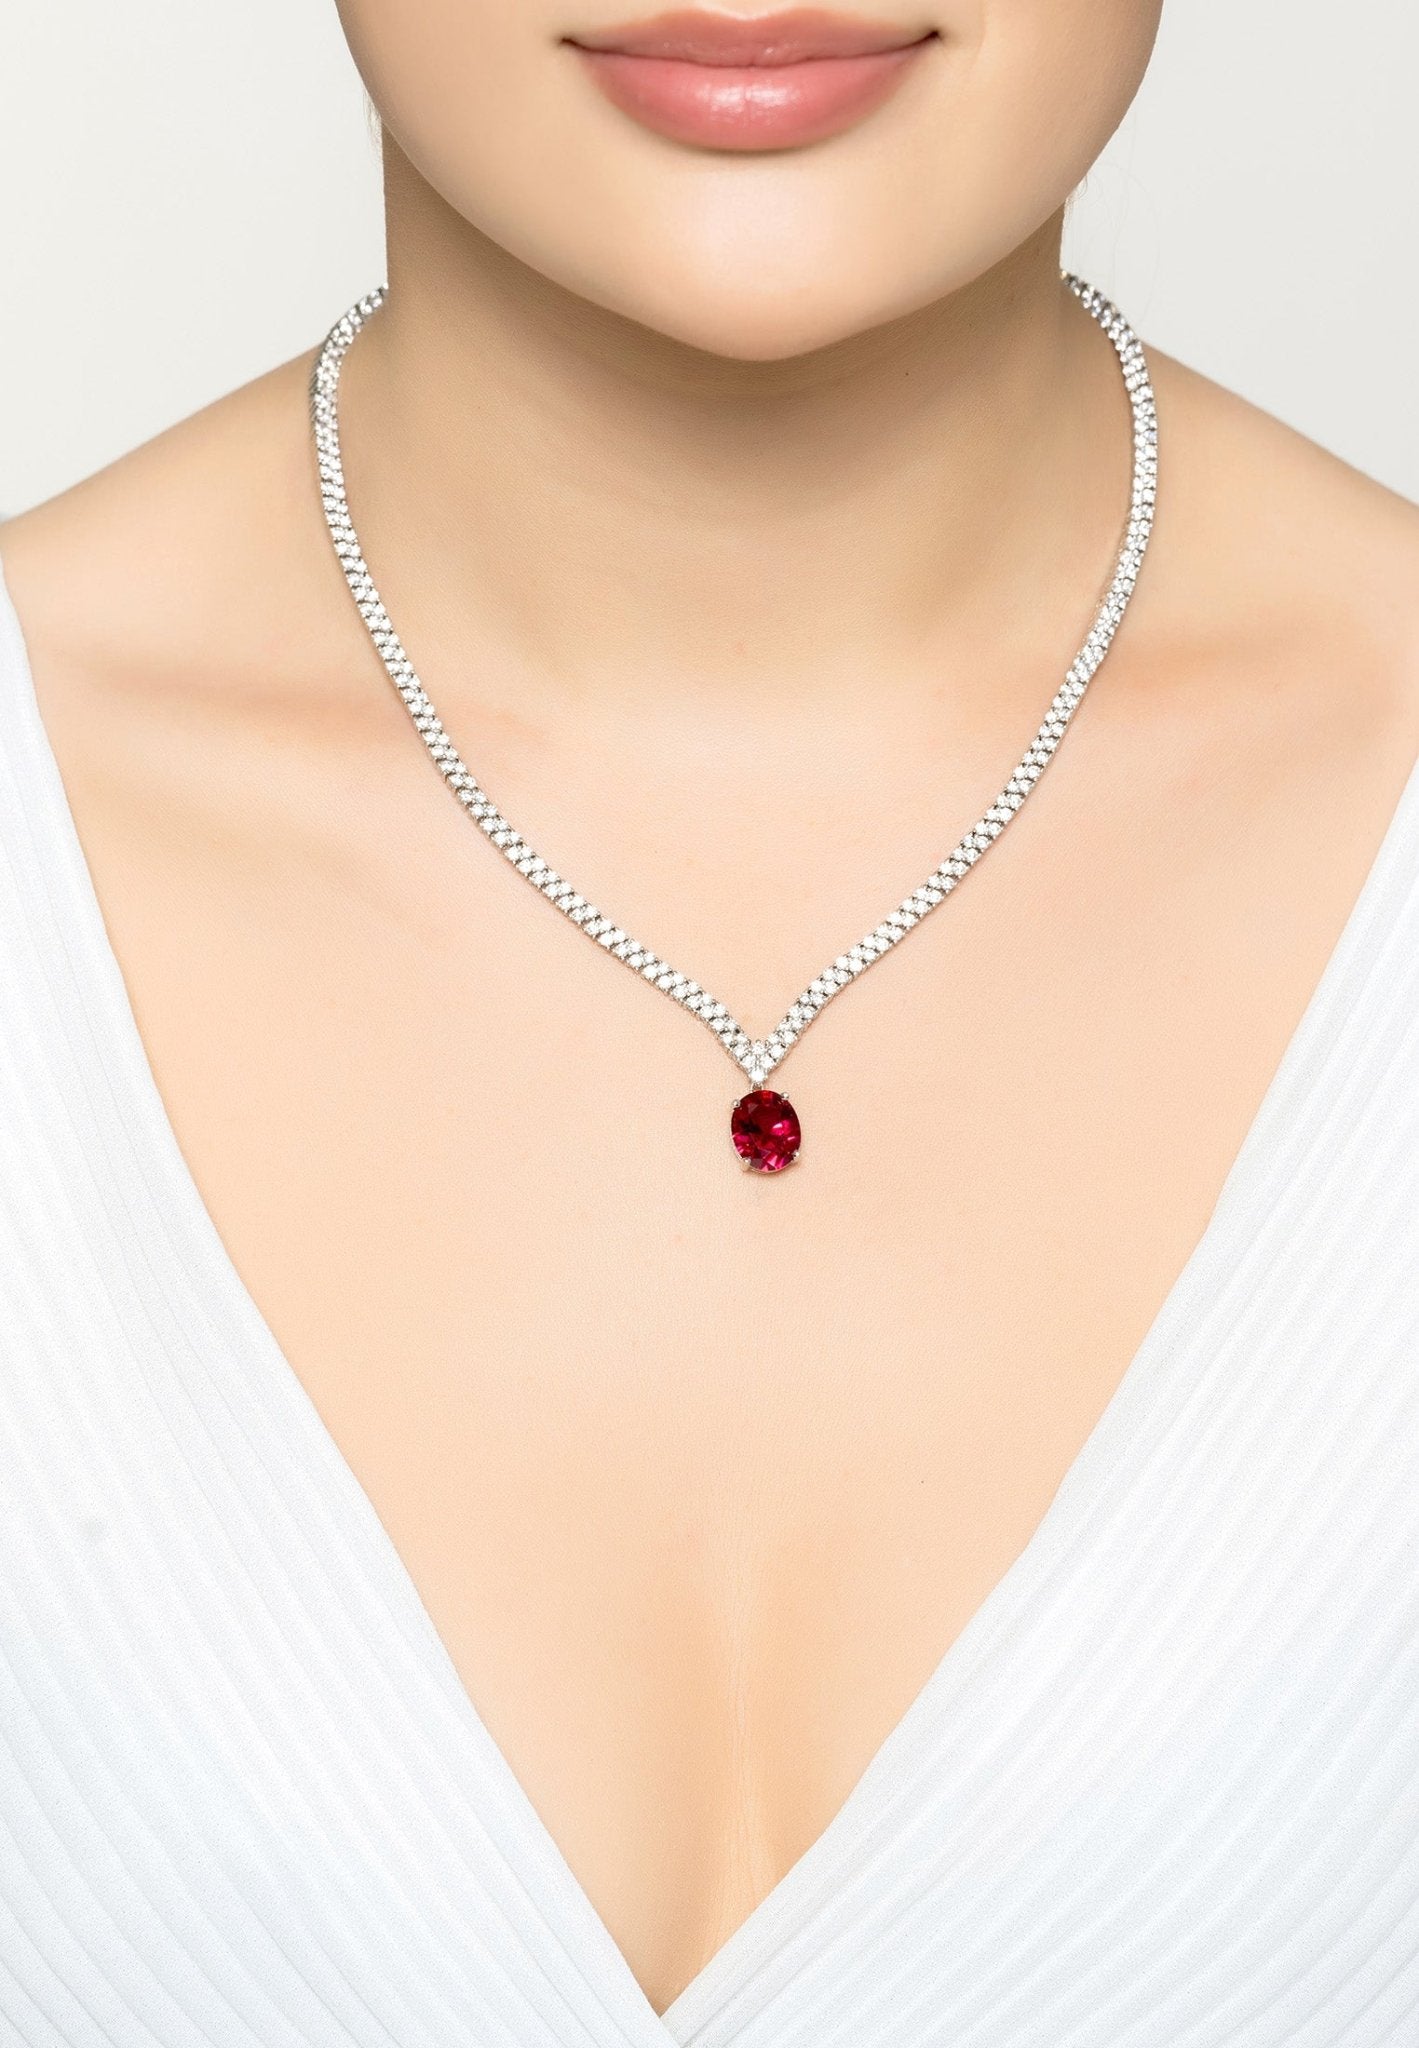 Gemstone Jewelry - 18 CT TGW Heart Shaped Created Gemstone and Created  White Sapphire Tennis Necklace in Sterling Silver - Discounts for Veterans,  VA employees and their families! | Veterans Canteen Service